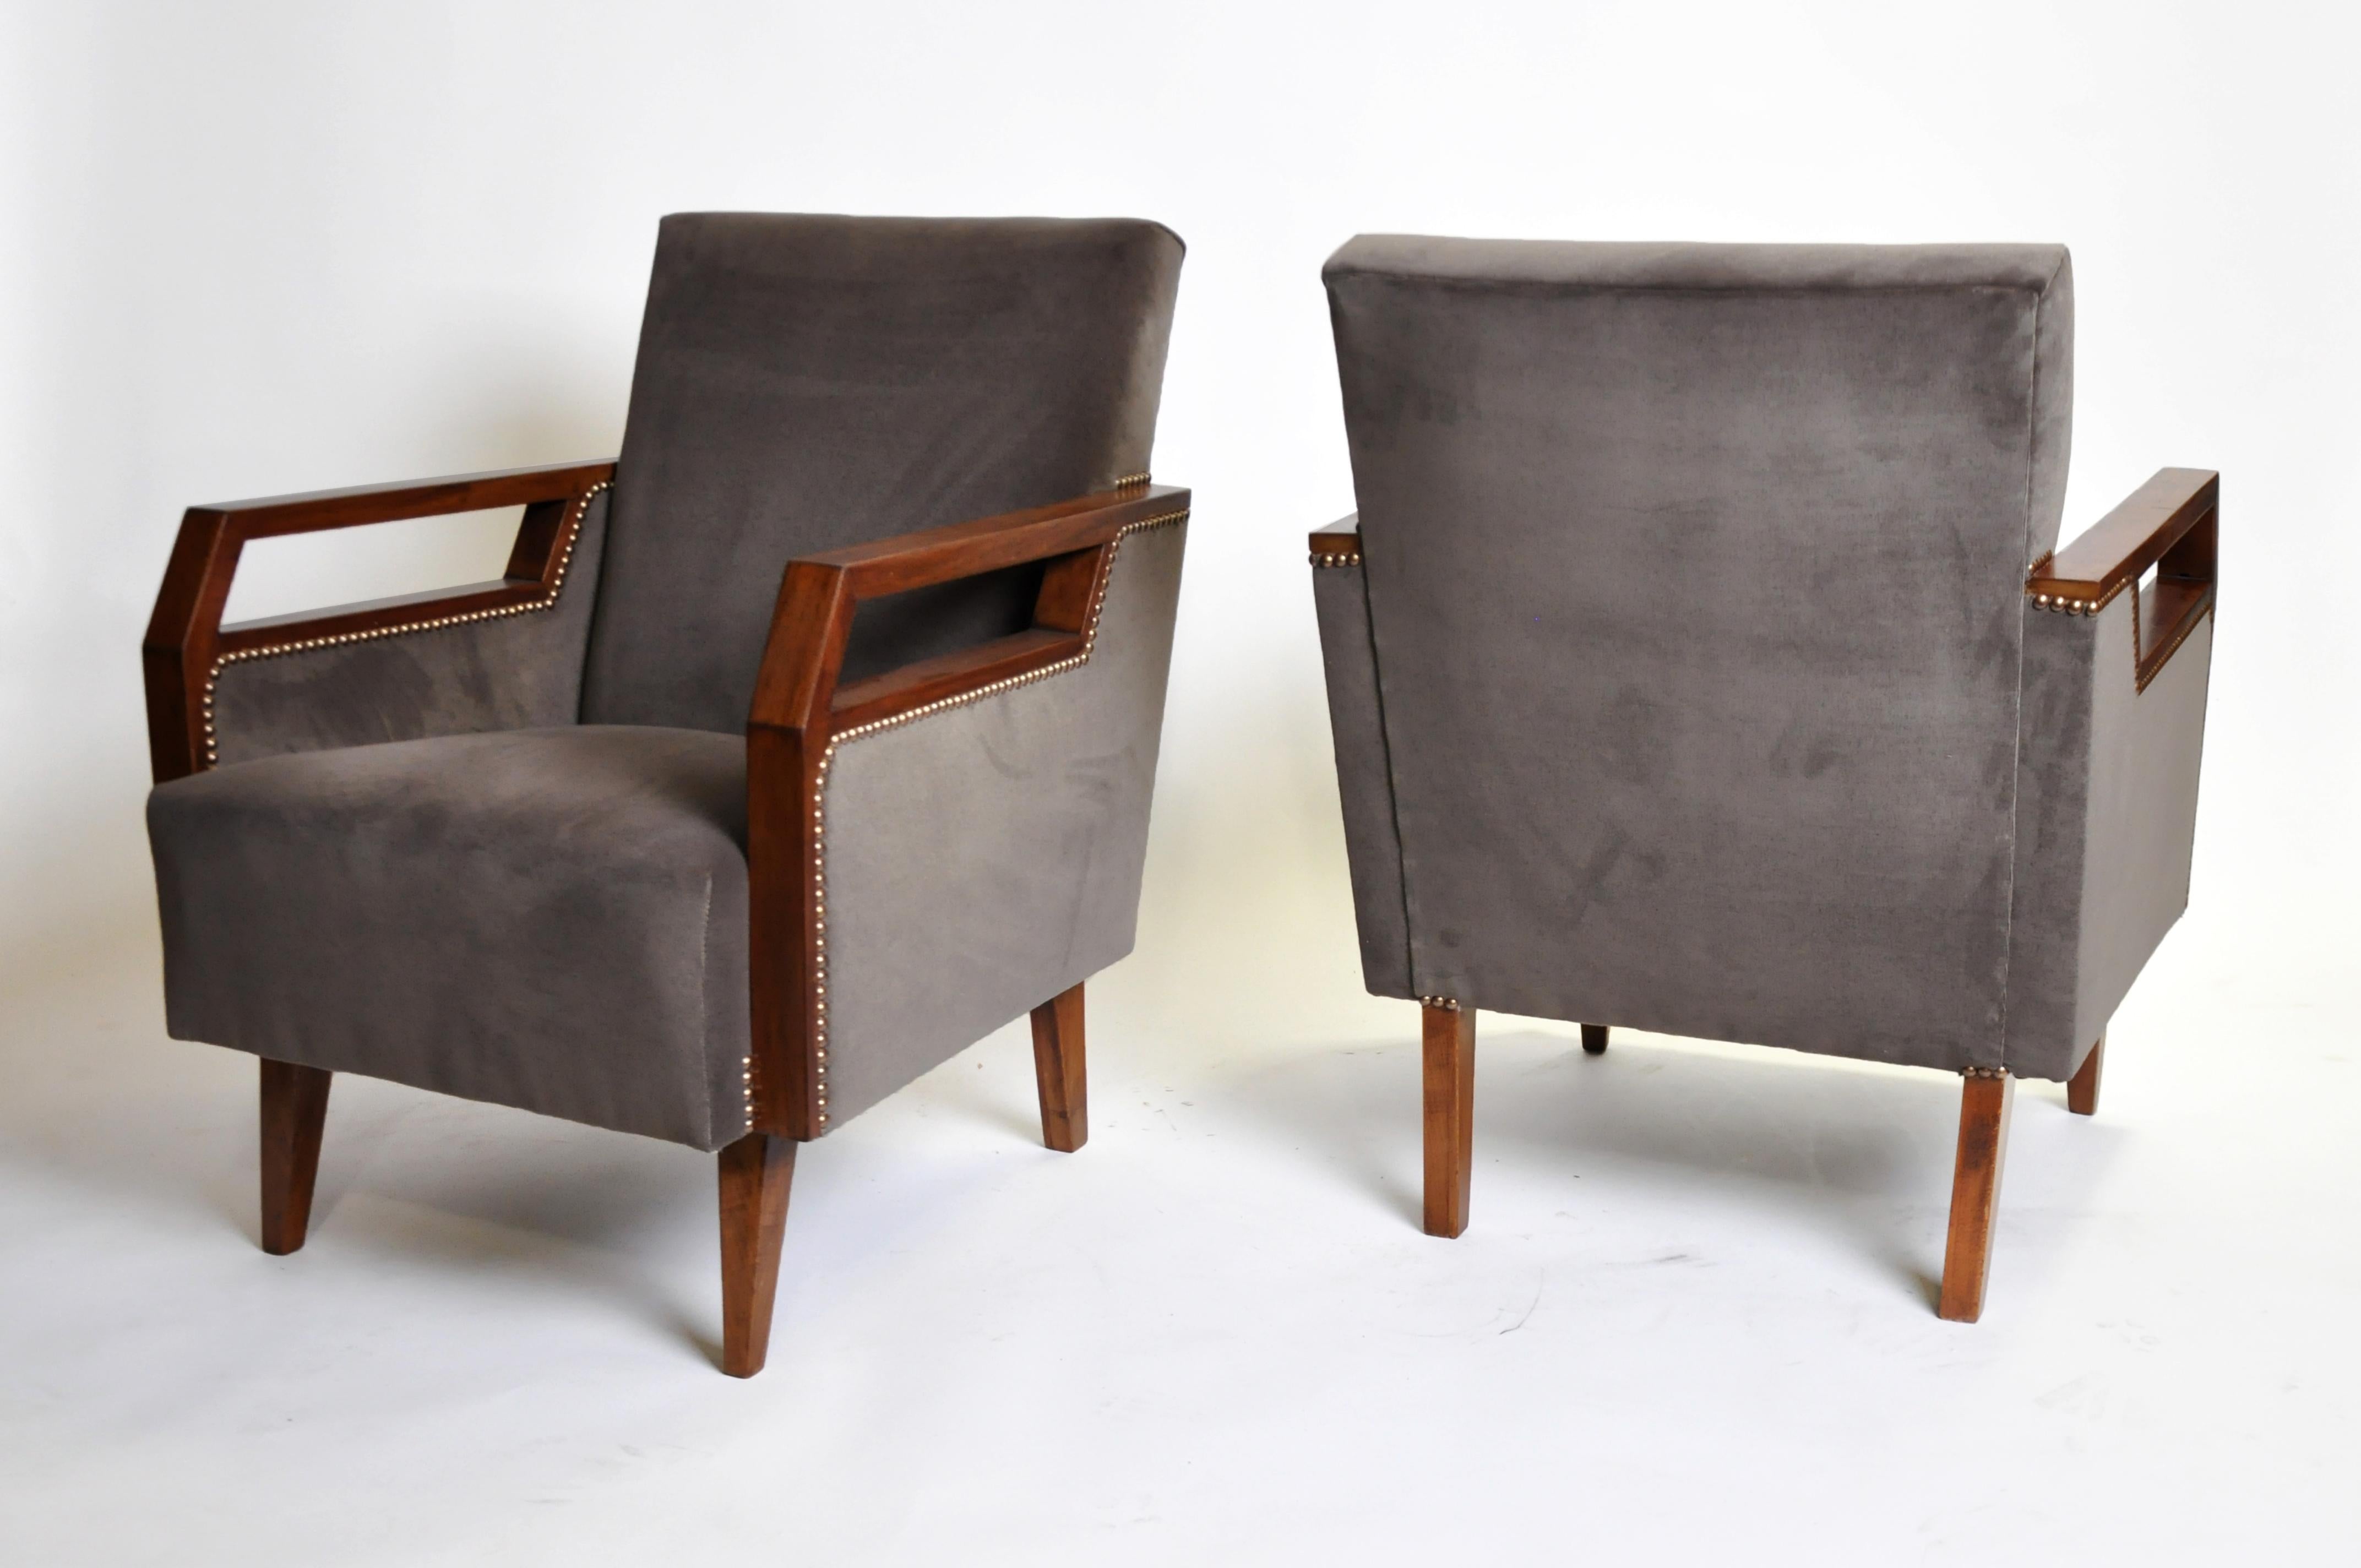 Upholstery Pair of Mid-Century Modern Chairs